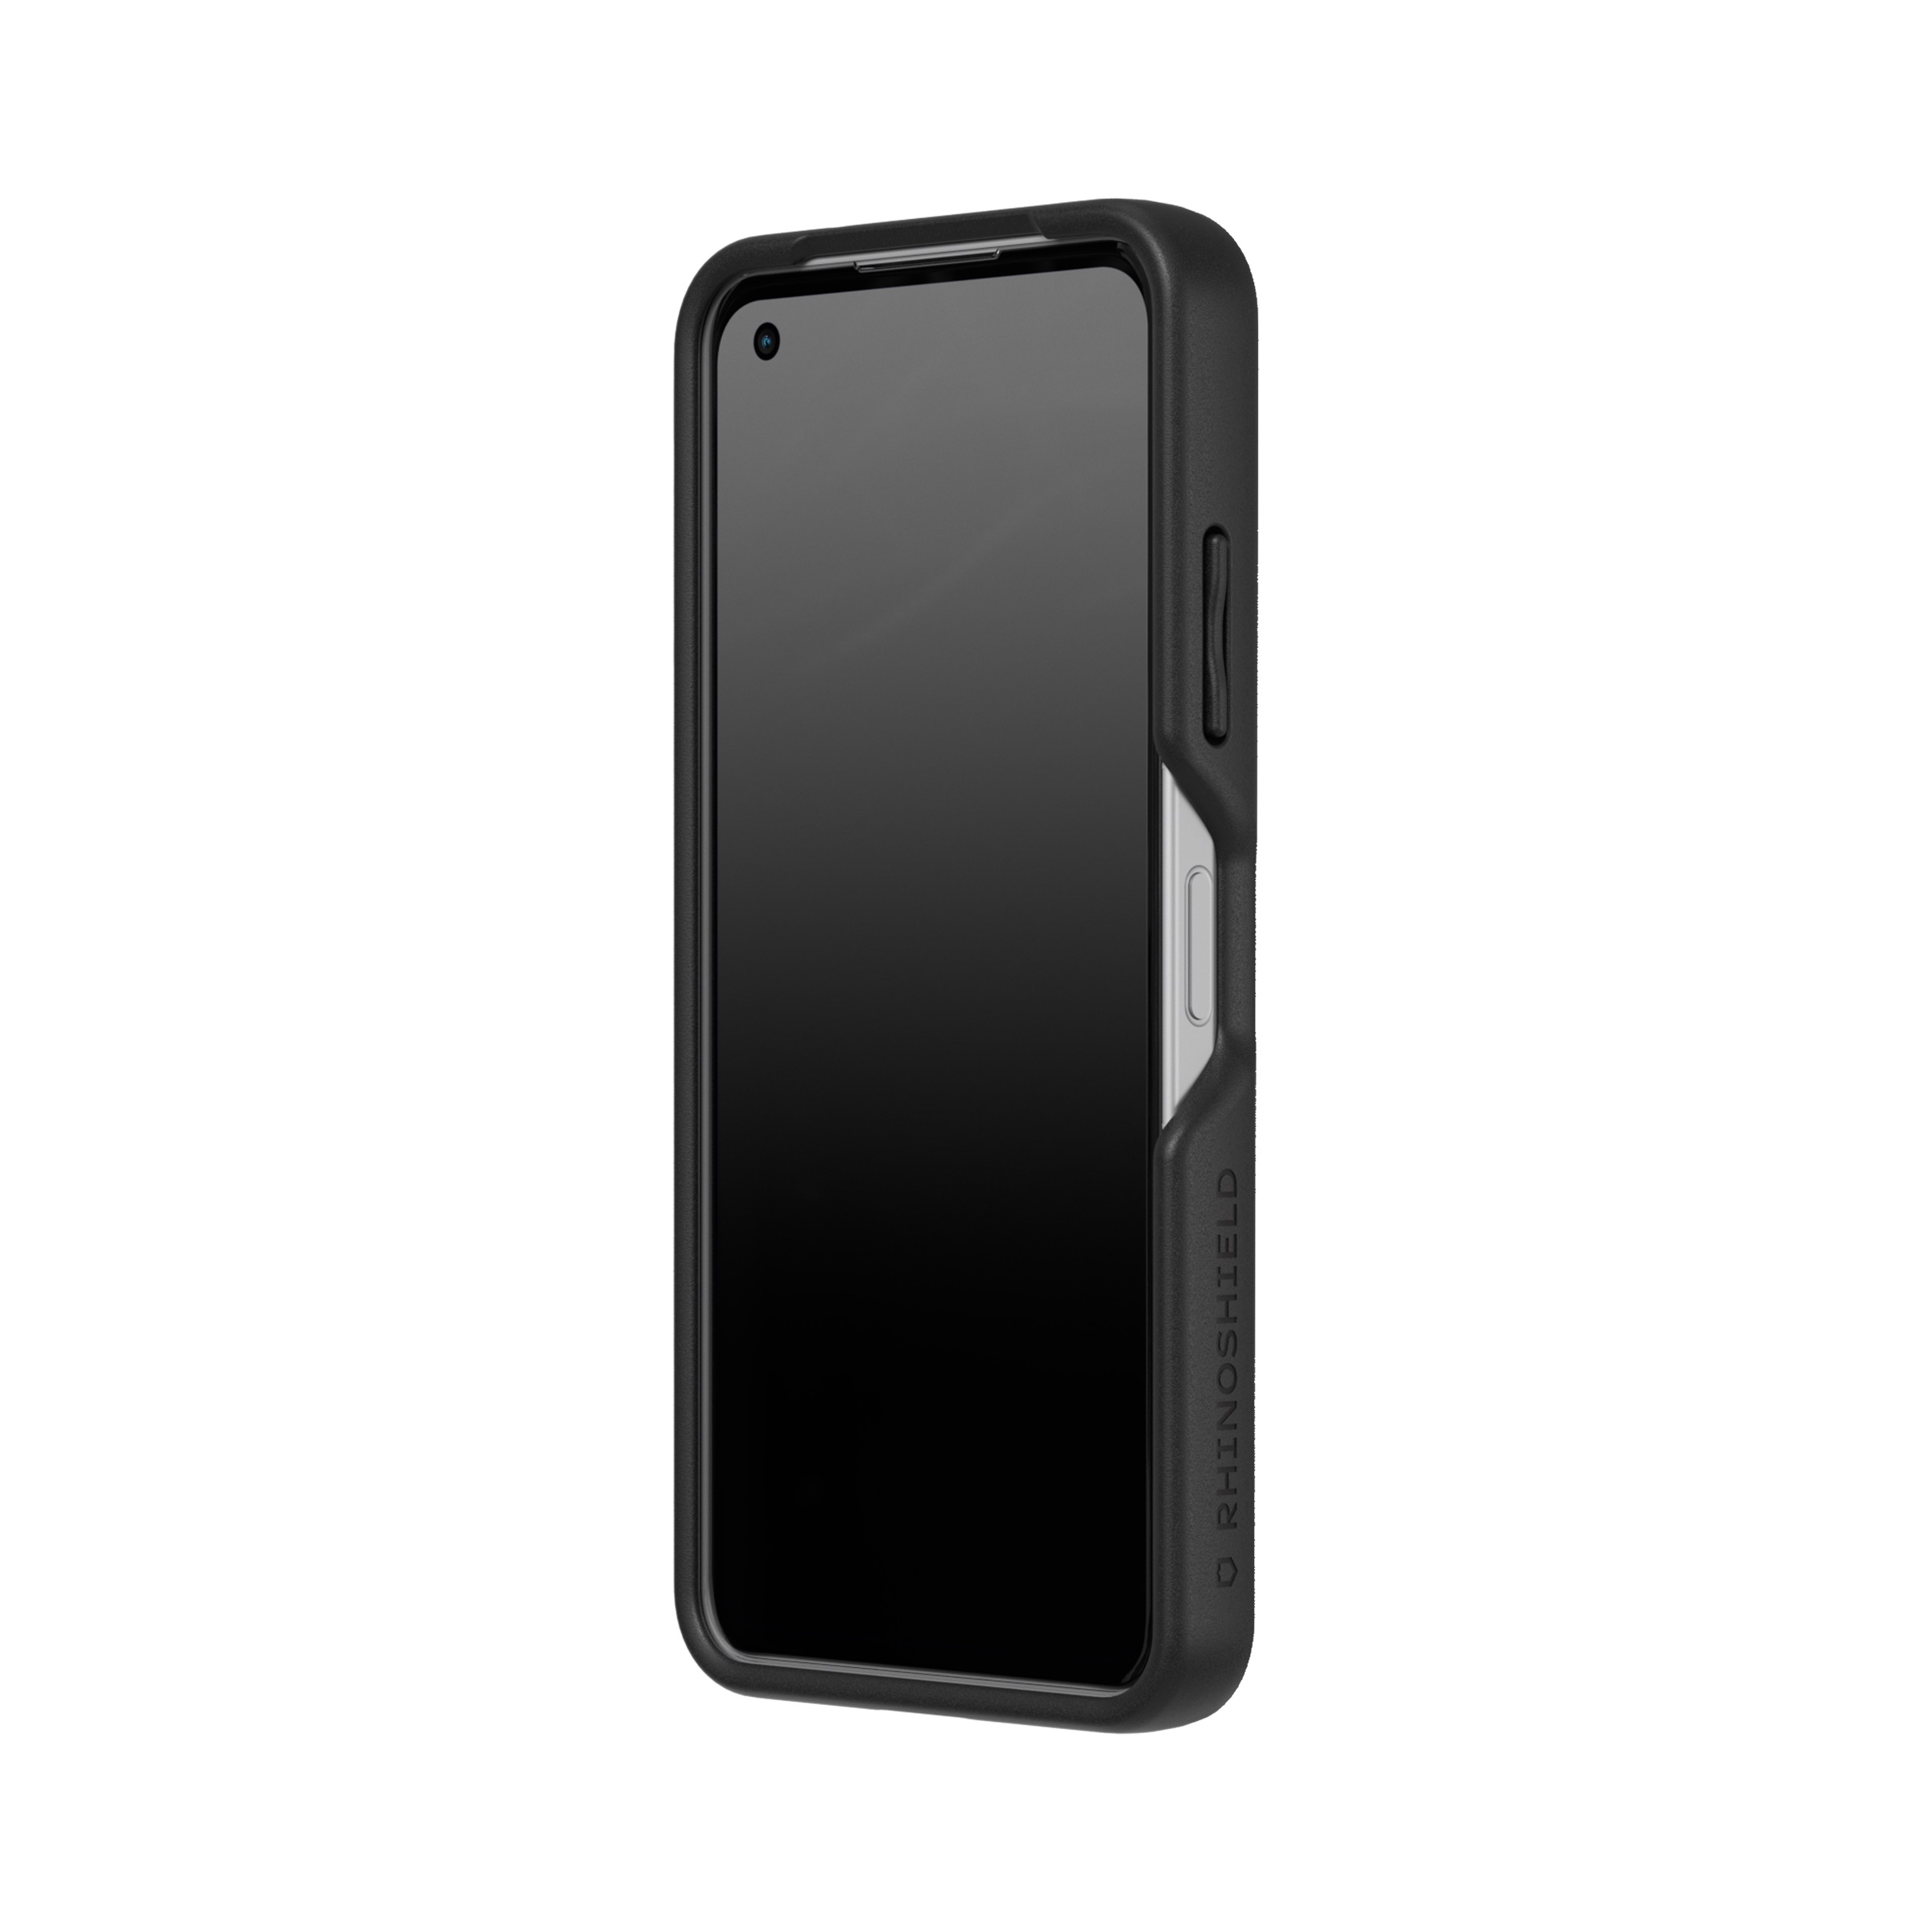 RhinoShield SolidSuit for iPhone 13 series: First Look at Some